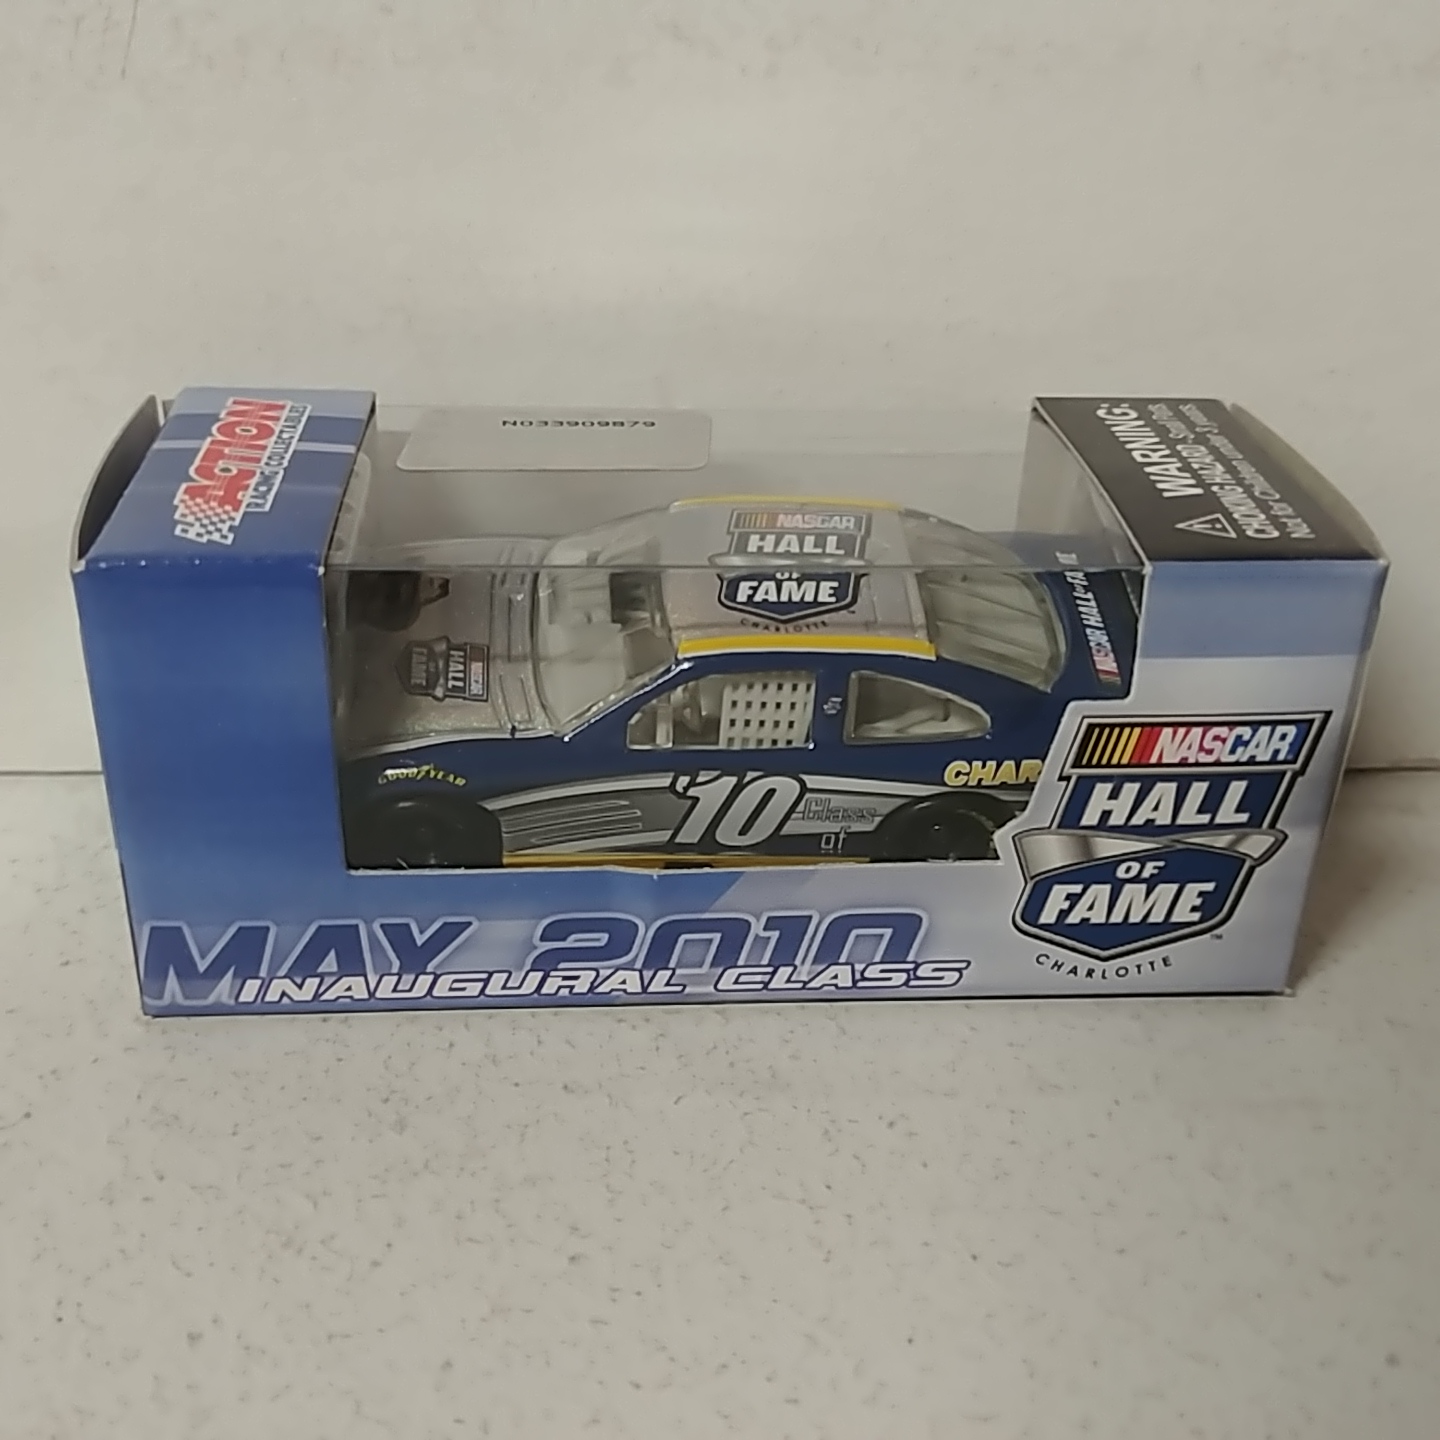 2010 Richard Petty 1/64th "NASCAR Hall Of Fame" Pitstop Series car